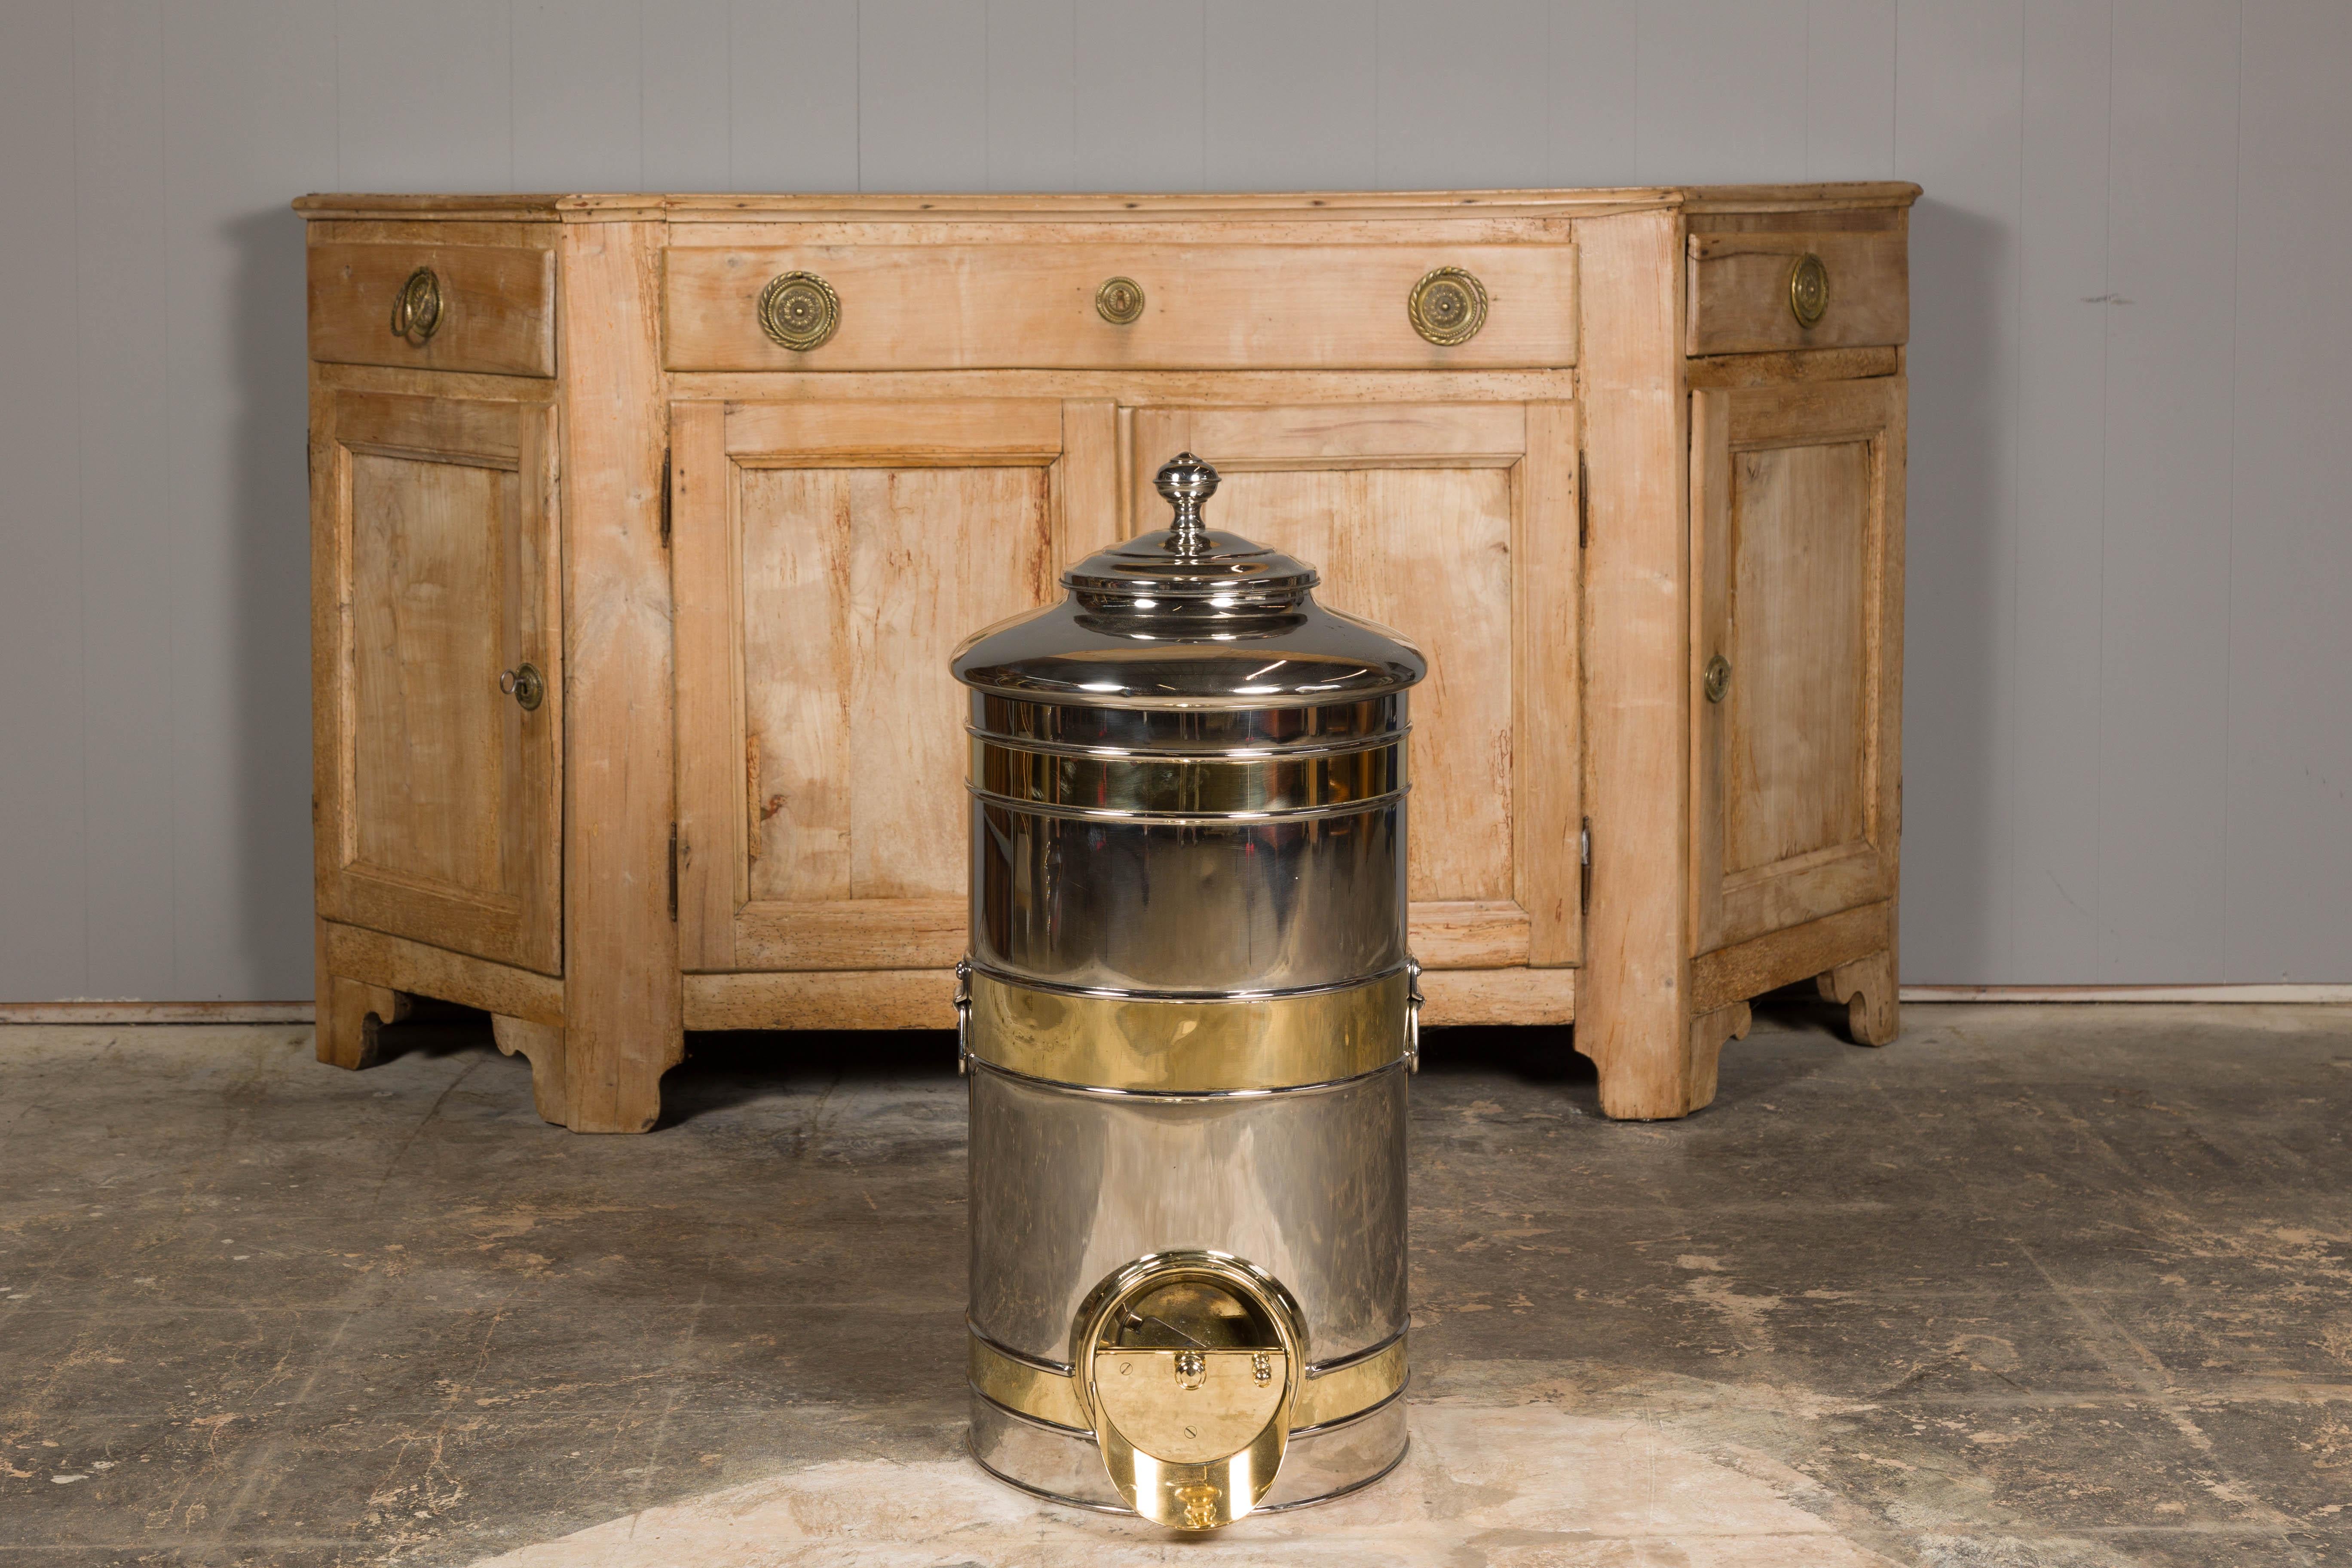 20th Century French Turn of the Century Steel and Brass Coffee Bean Dispenser, circa 1900 For Sale